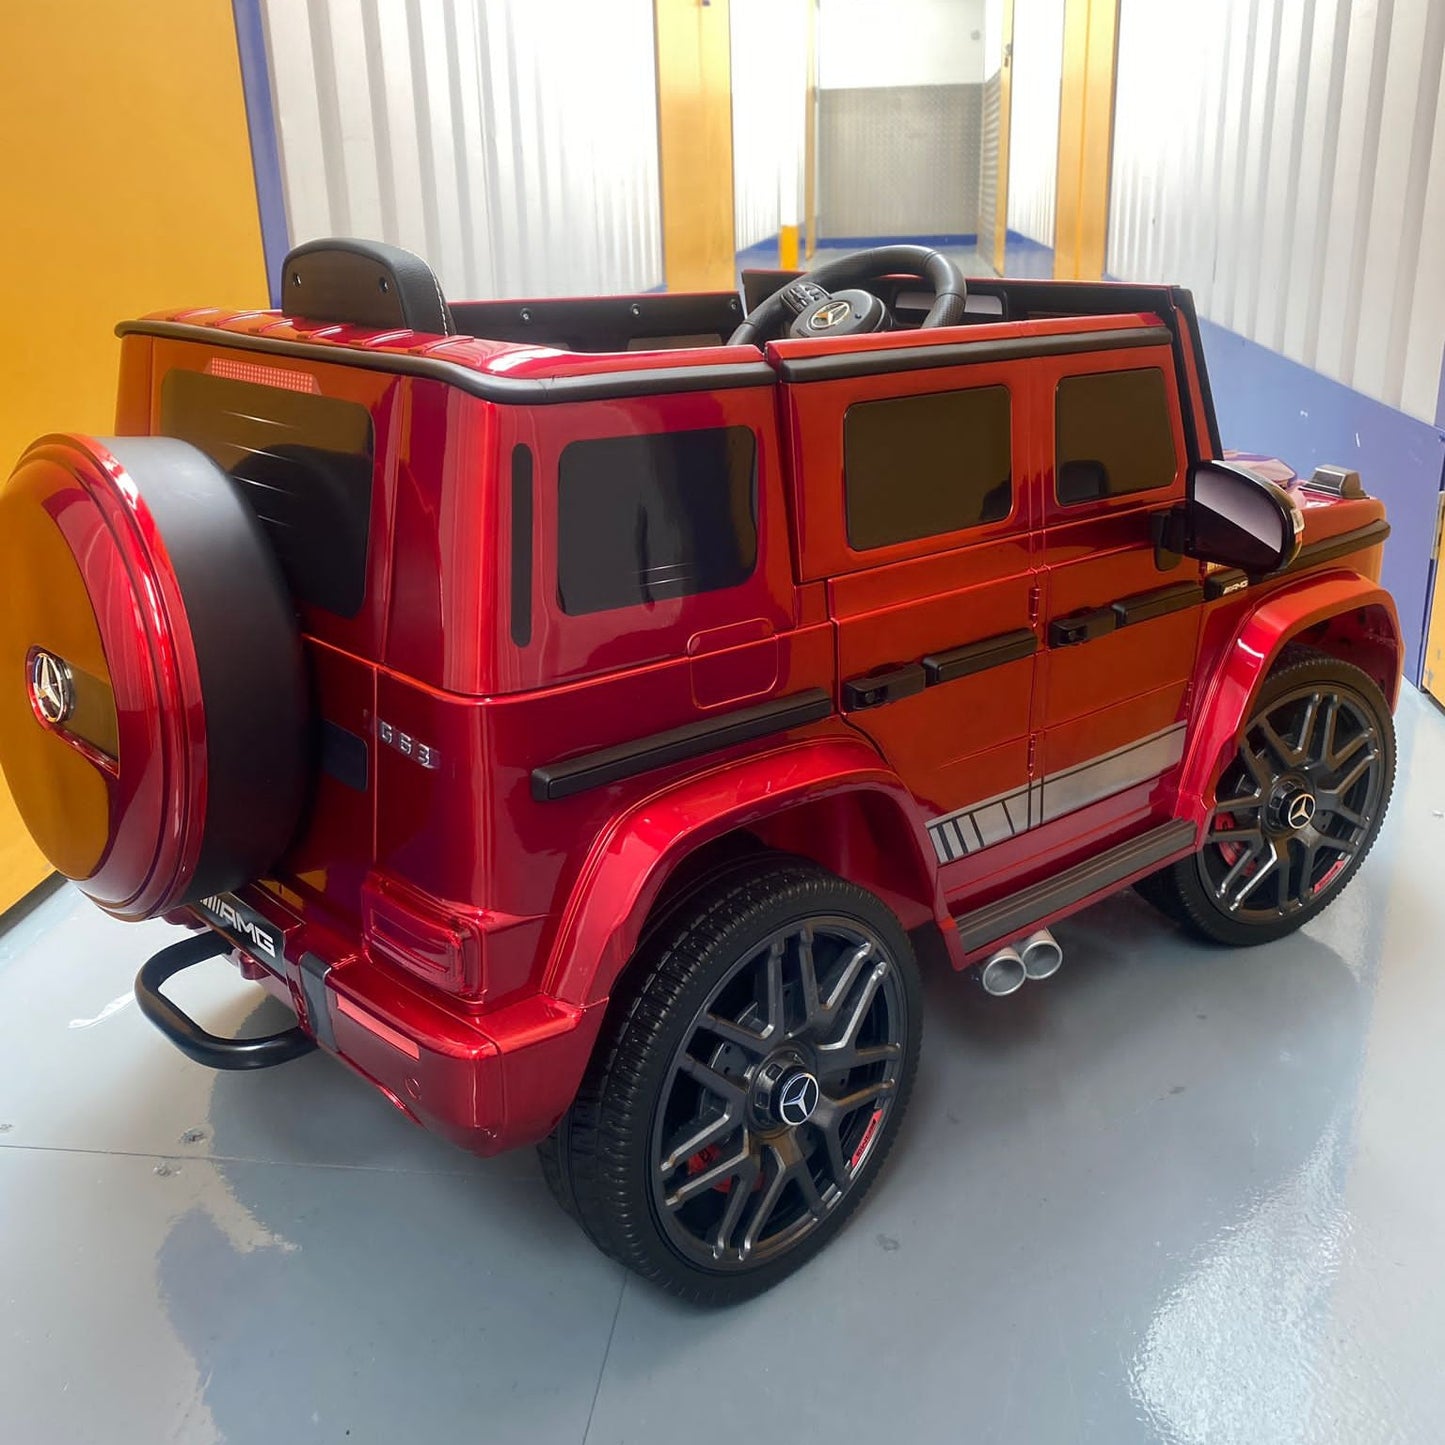 Pre-Order Mercedes G63 12v Ride on Car SUV with Remote - Metallic Red - With High Doors